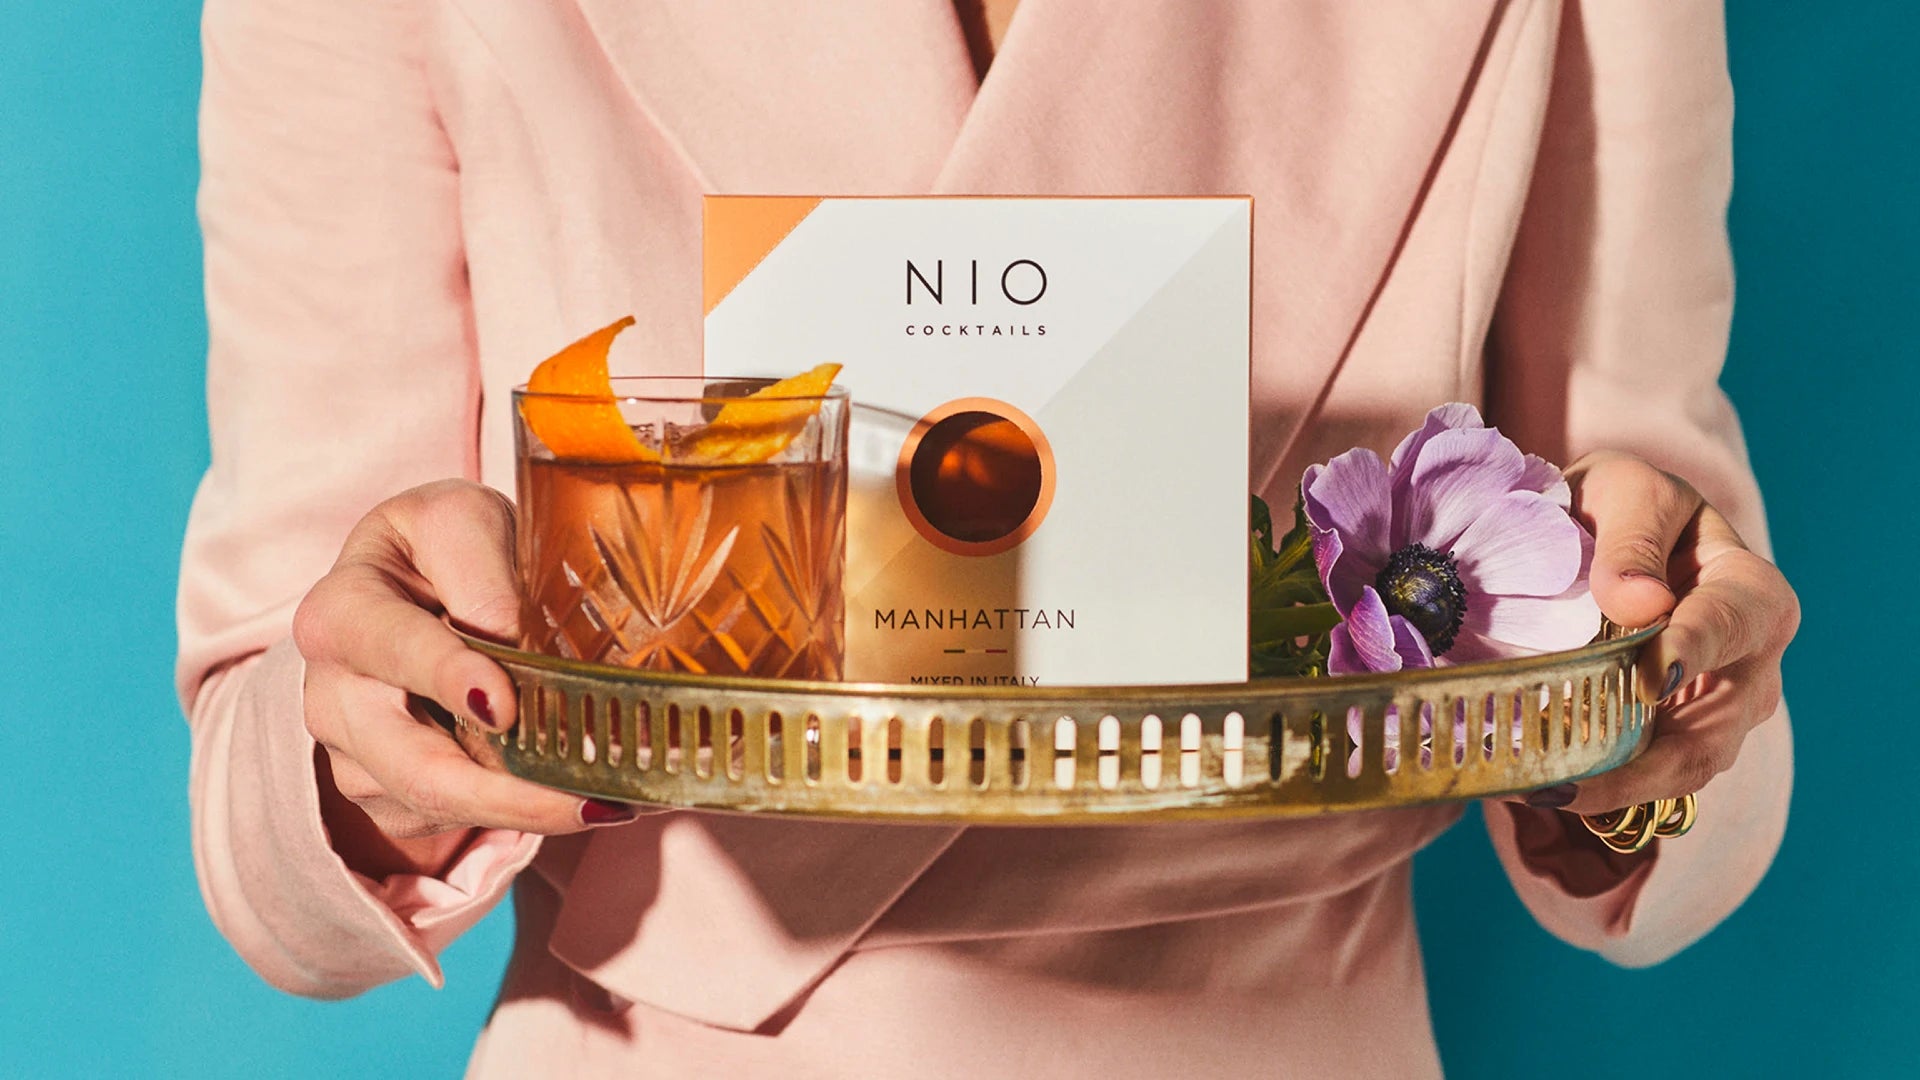 lady in pink elegant dress serving tray with manhattan nio cocktail pack and glass